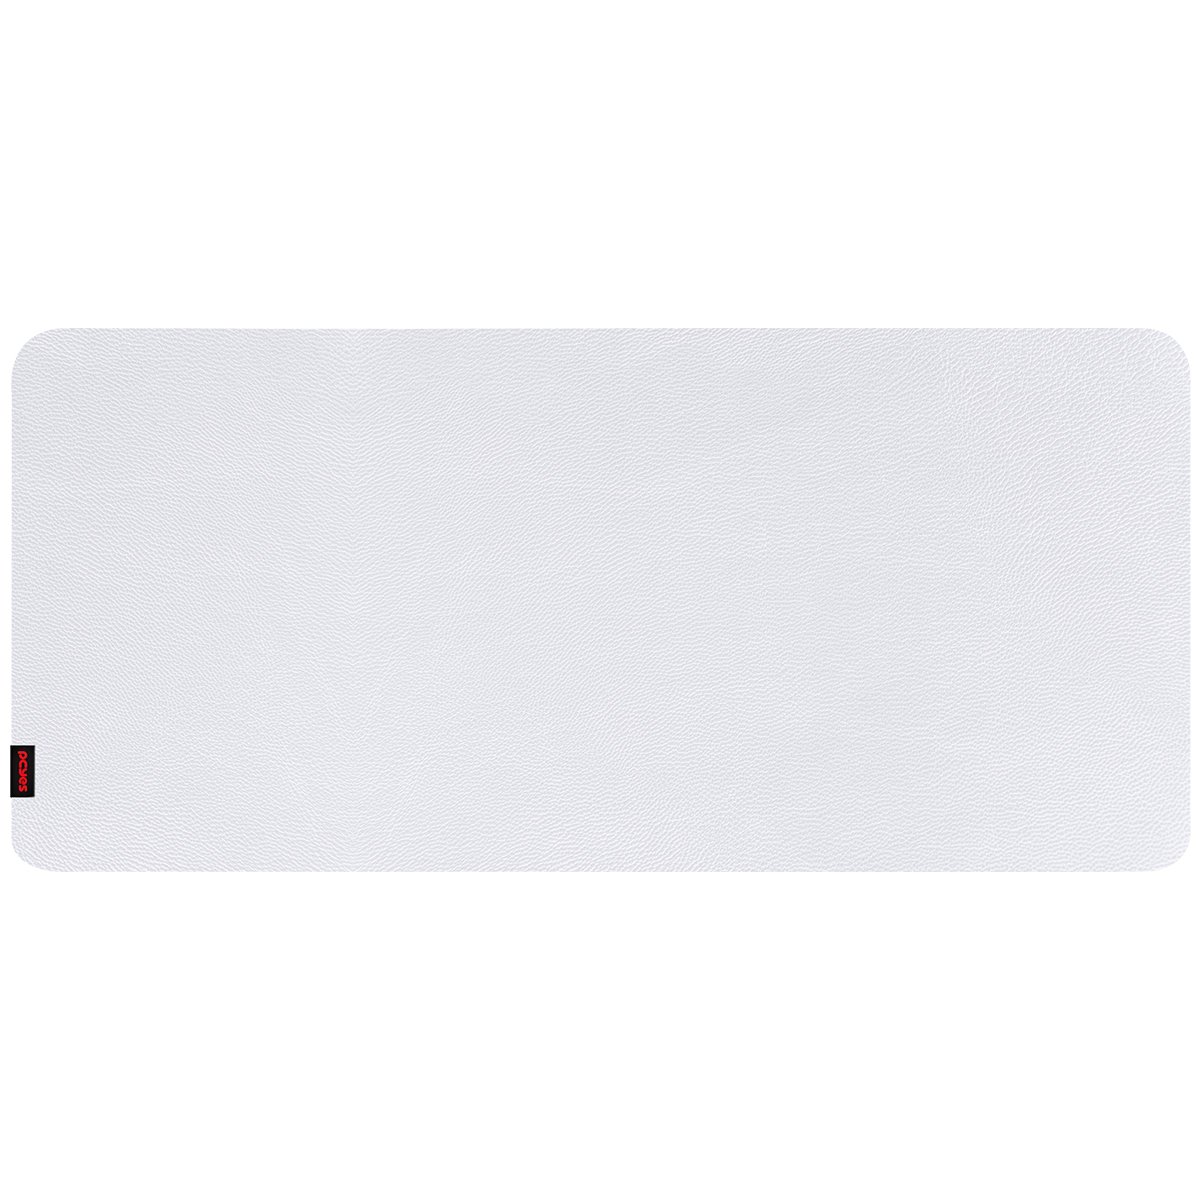 Mouse Pad Exclusive Branco 800x400 - Pmpexw